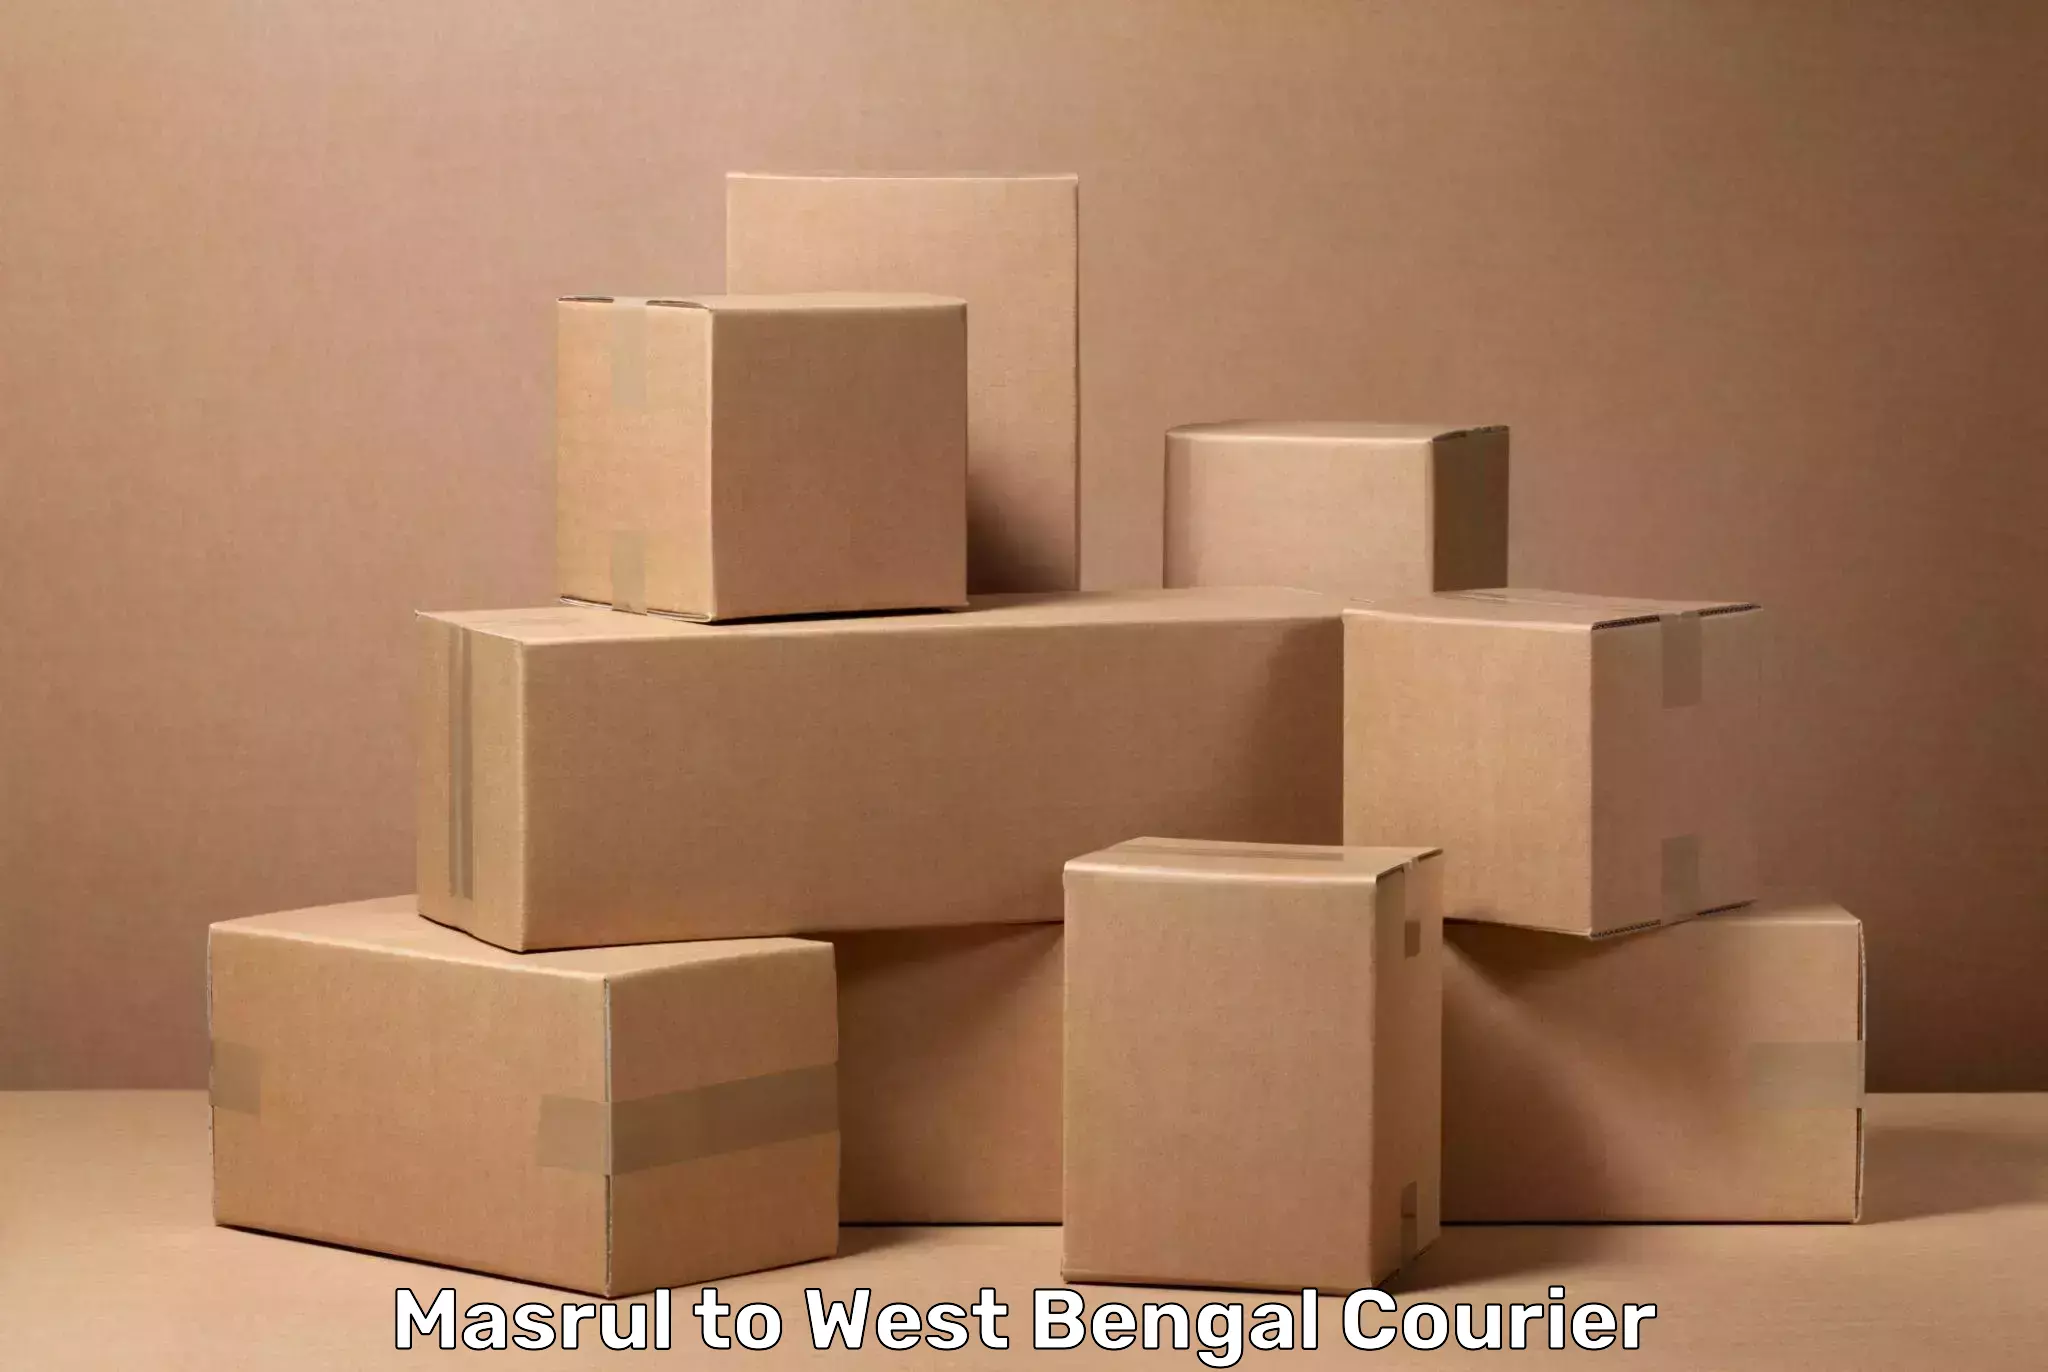 Baggage transport network Masrul to West Bengal